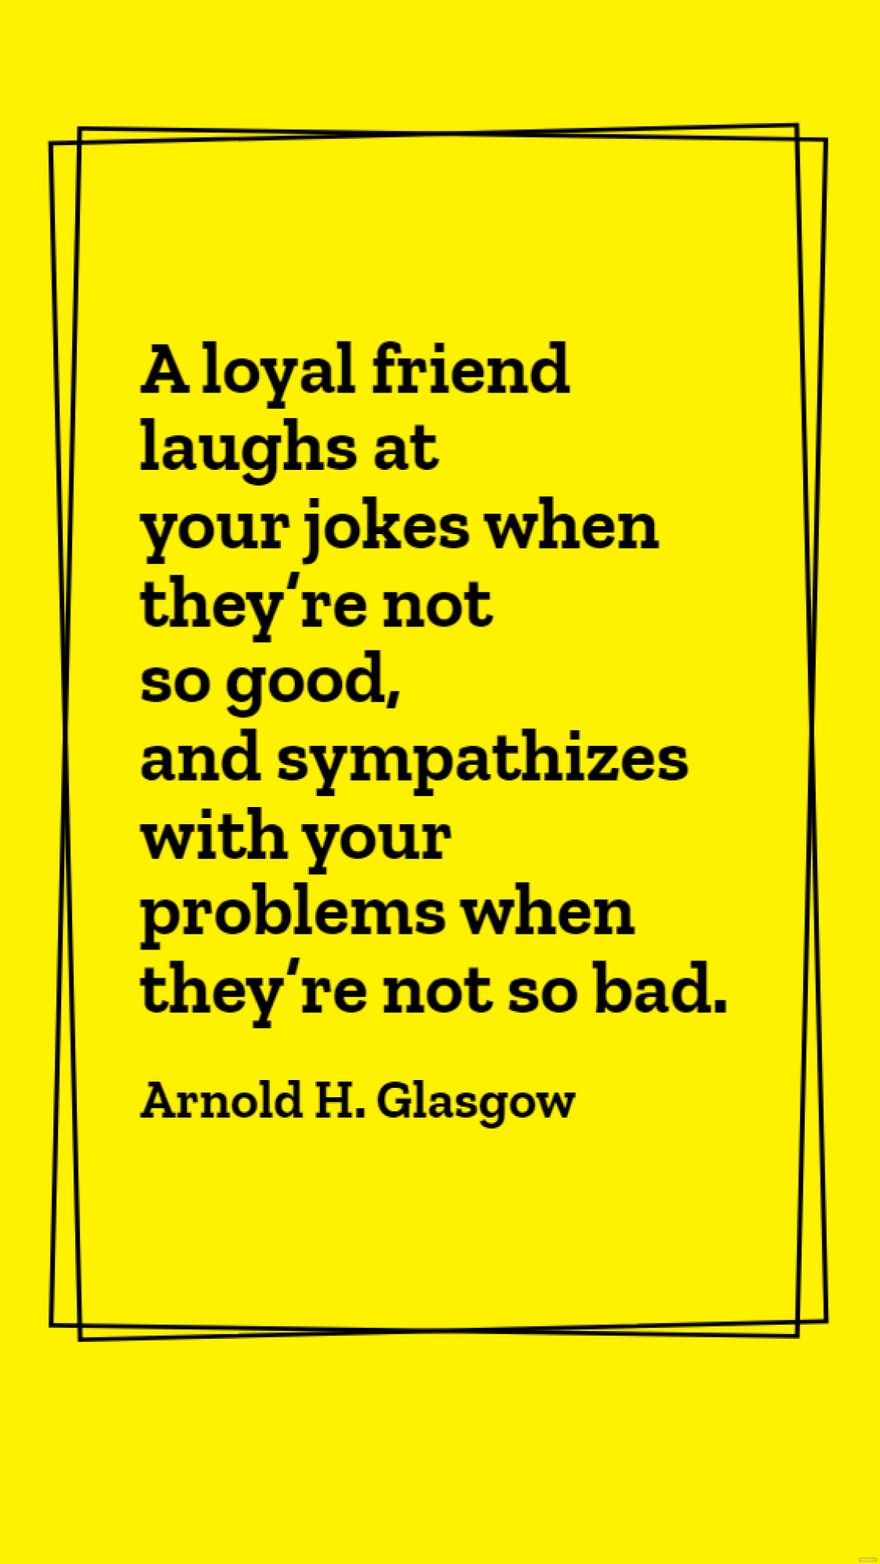 Arnold H. Glasgow - A loyal friend laughs at your jokes when they’re not so good, and sympathizes with your problems when they’re not so bad.